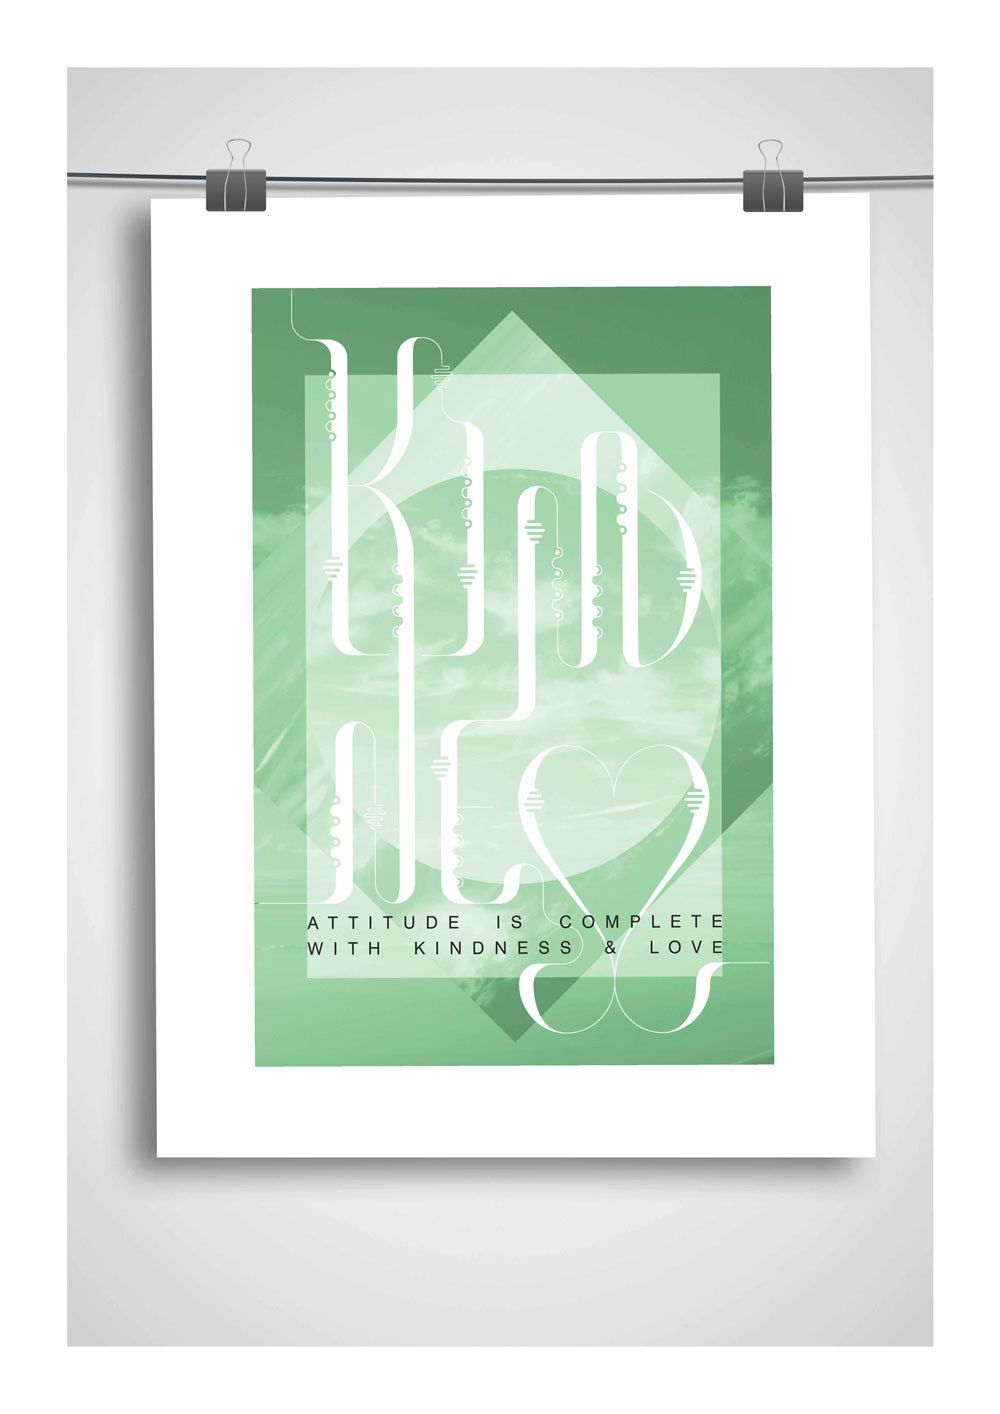 graphic design iphone android kindness connection